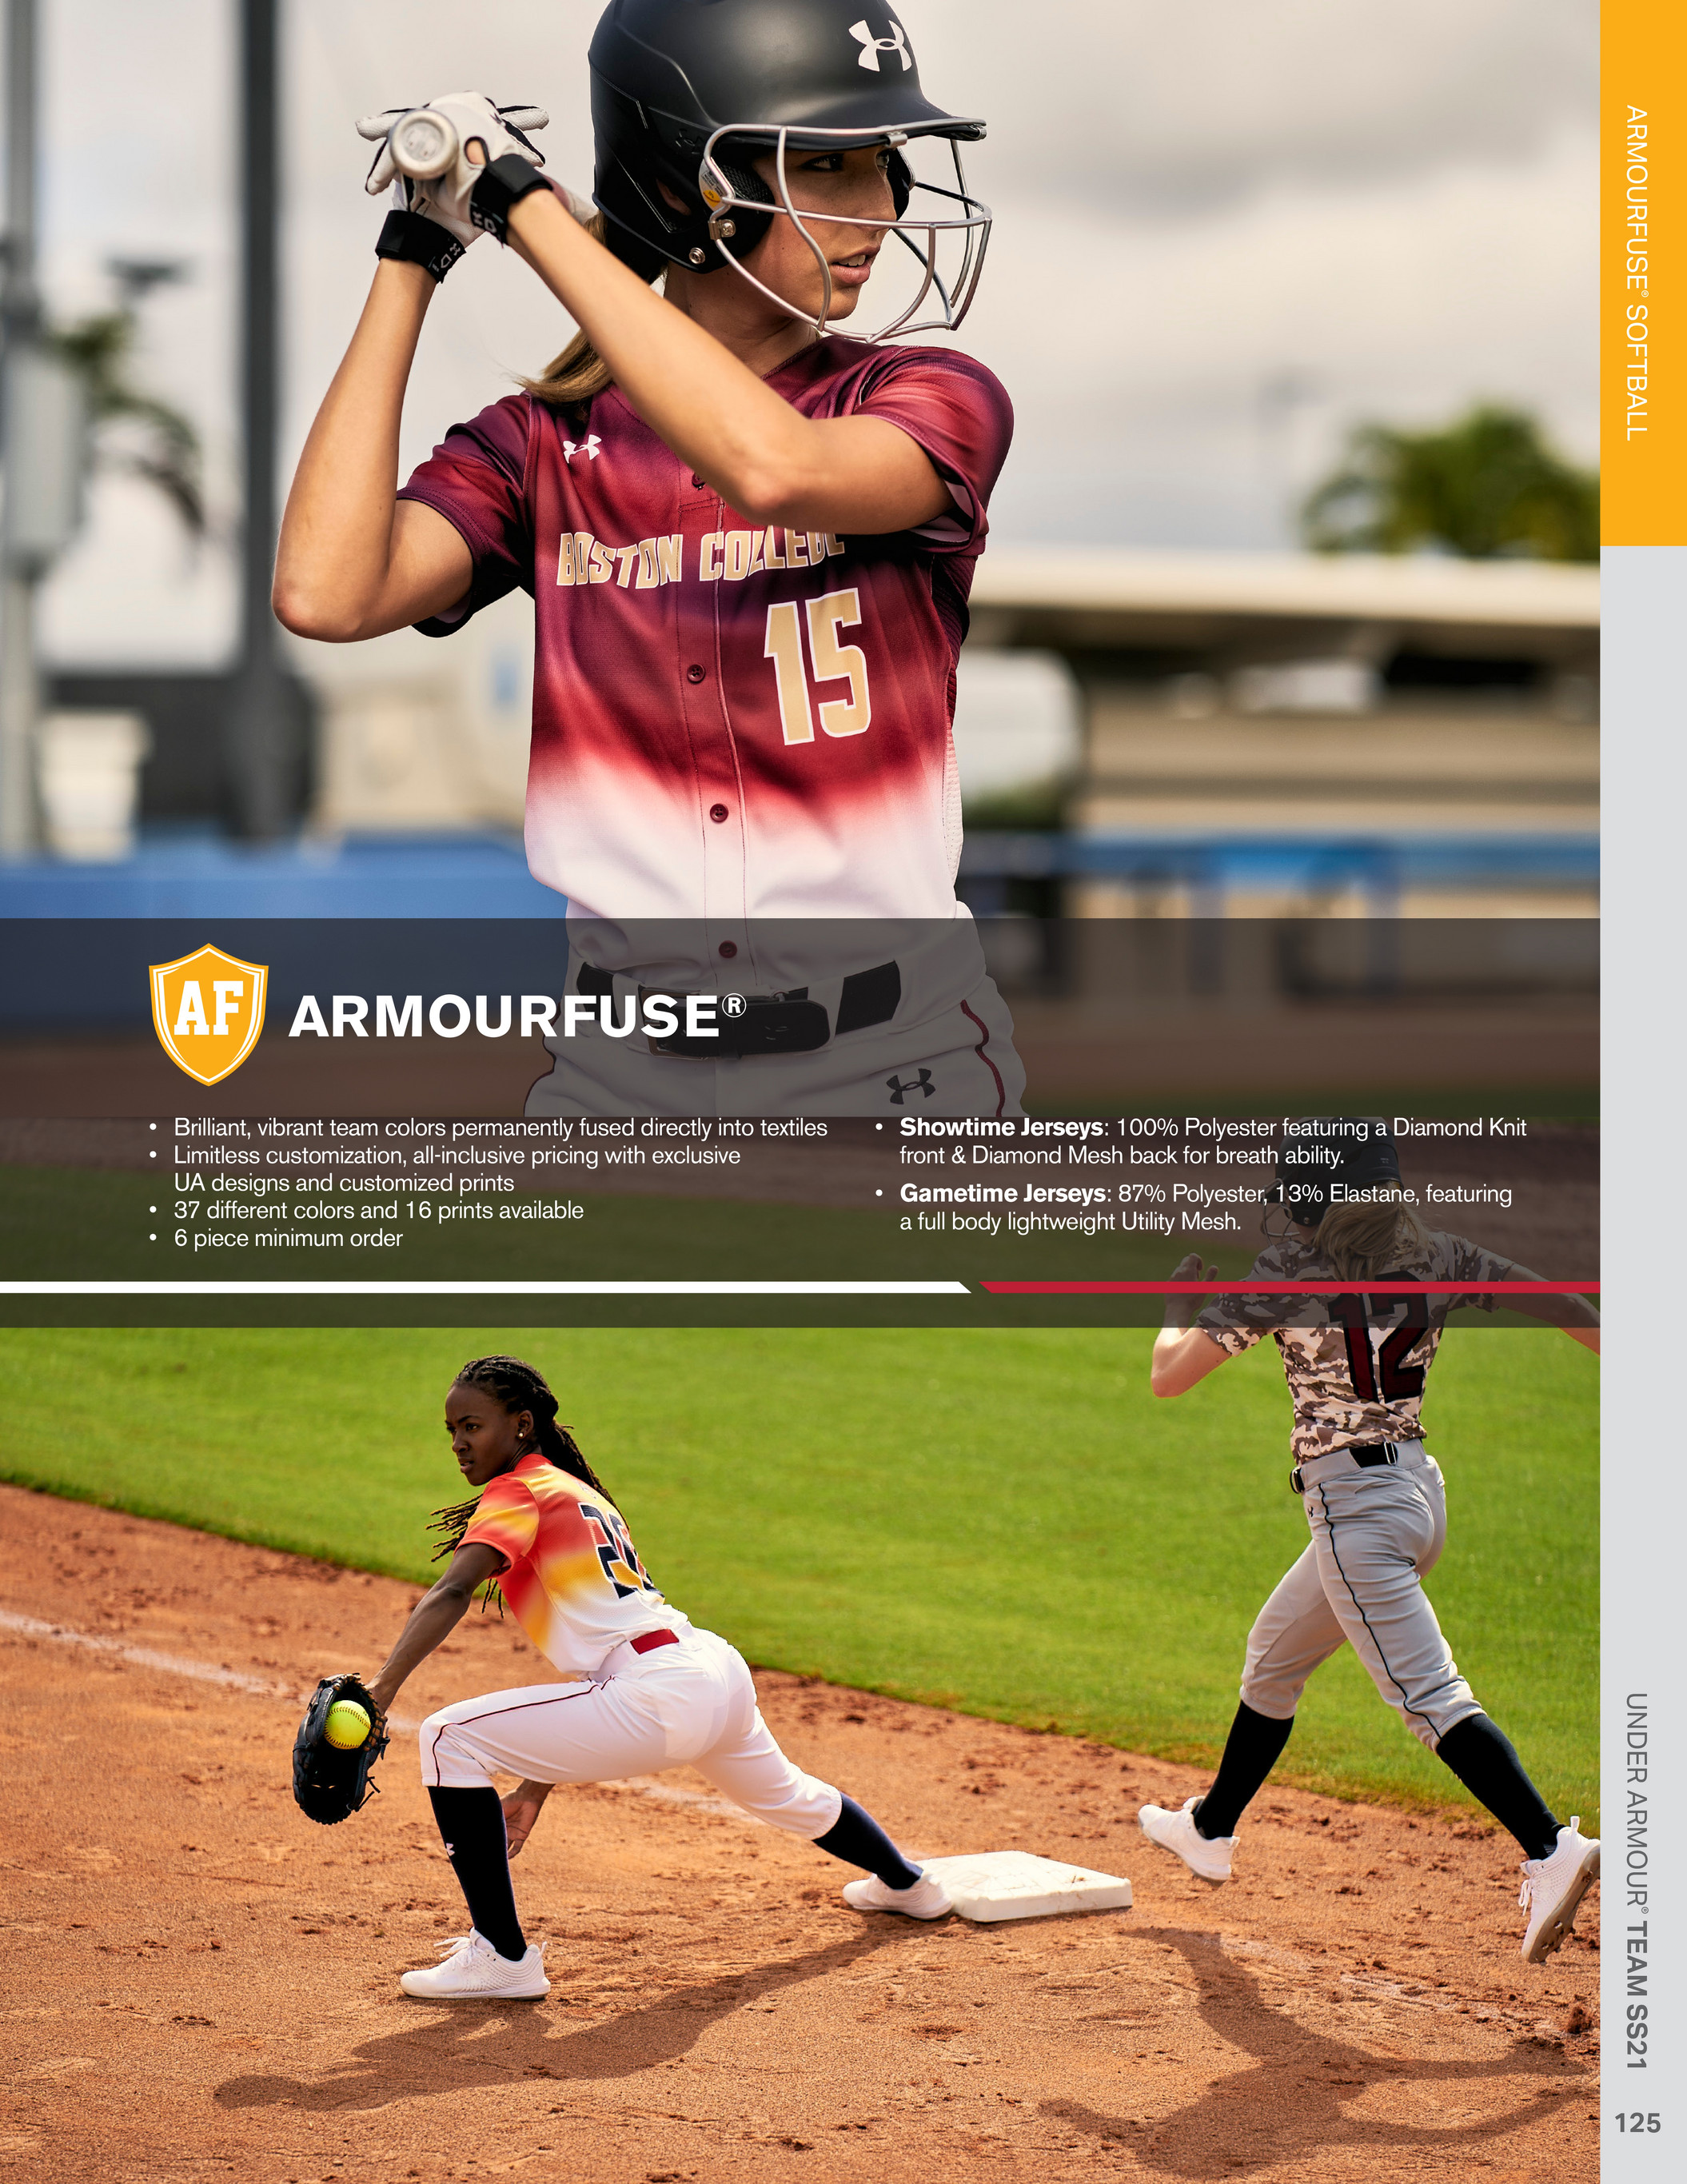 Under Armour Baseball Uniforms SS21 - Page 6-7